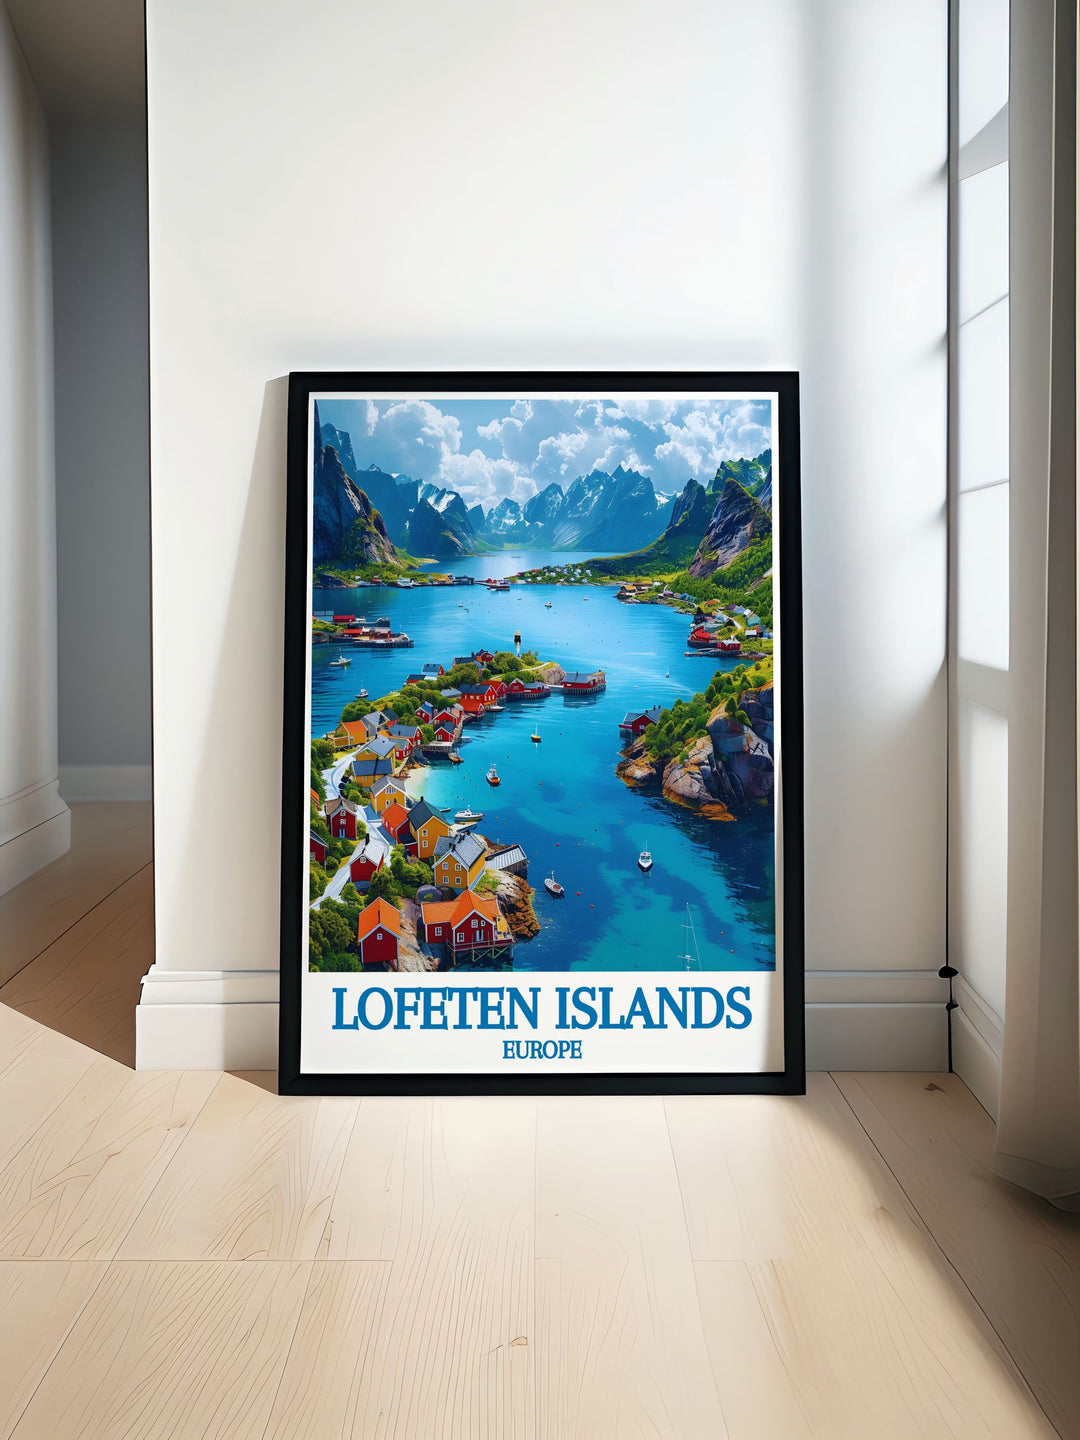 Custom print of Henningsvær in the Lofoten Islands, Norway, featuring the serene beauty of the village with its colorful houses and towering peaks. This personalized artwork captures the tranquility of the coastal landscape, making it a unique piece of art for any home decor. The vibrant colors and intricate details bring the scene to life, making this custom print a standout piece.